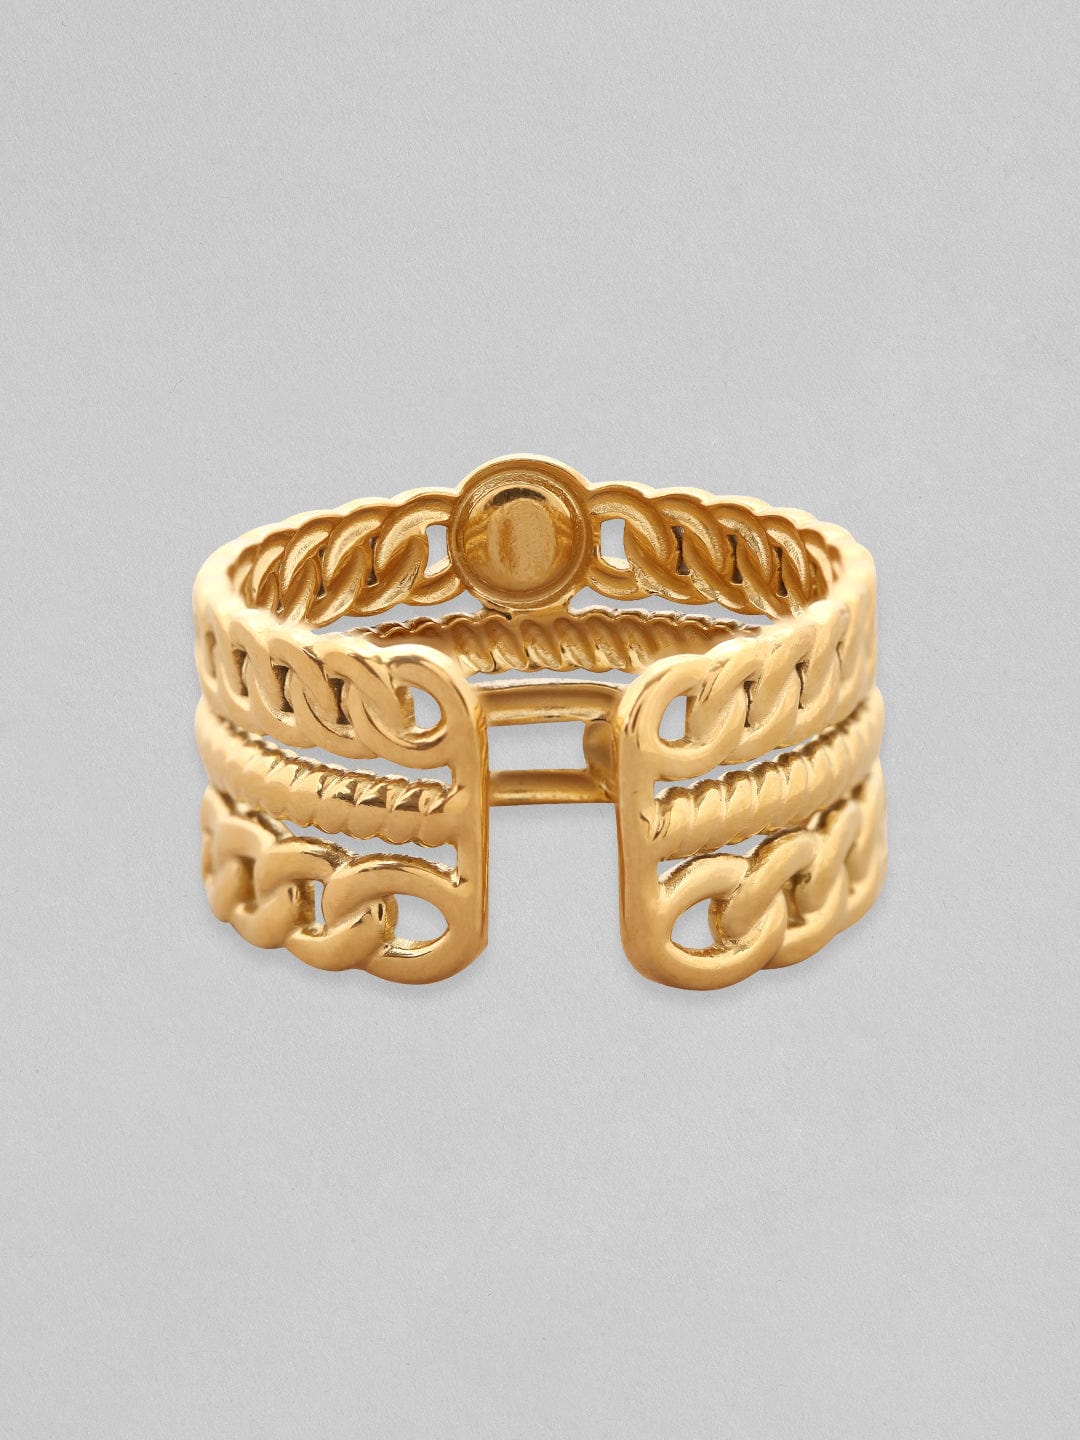 Rubans Voguish 18K Gold Plated Stainless Steel Cuban Link Adjustable Ring. Rings